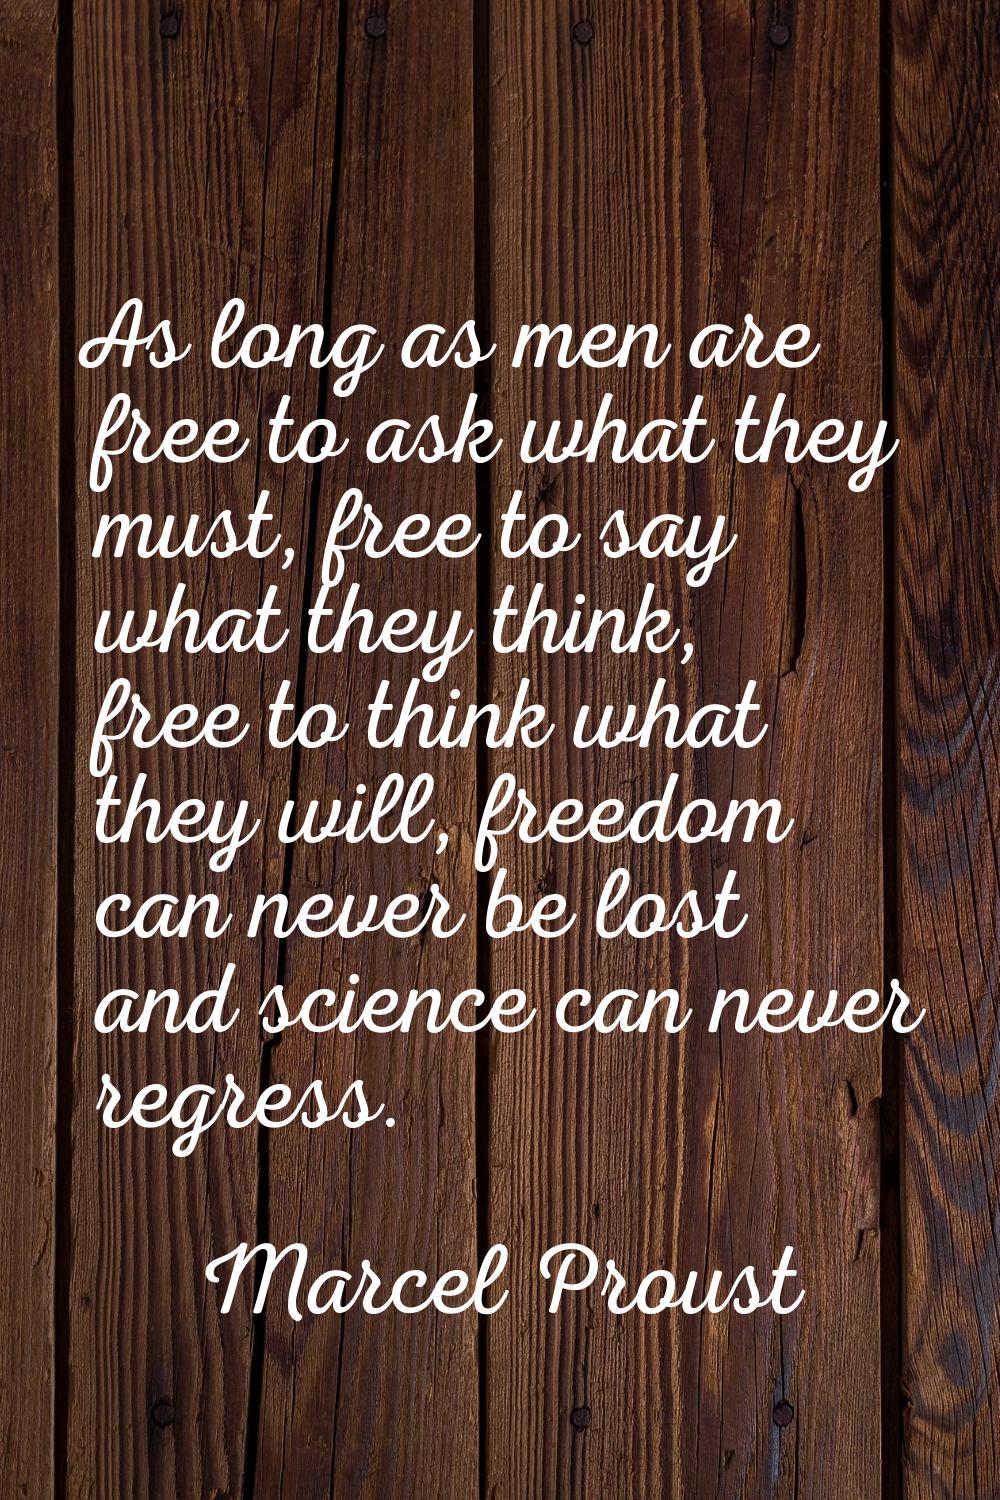 As long as men are free to ask what they must, free to say what they think, free to think what they